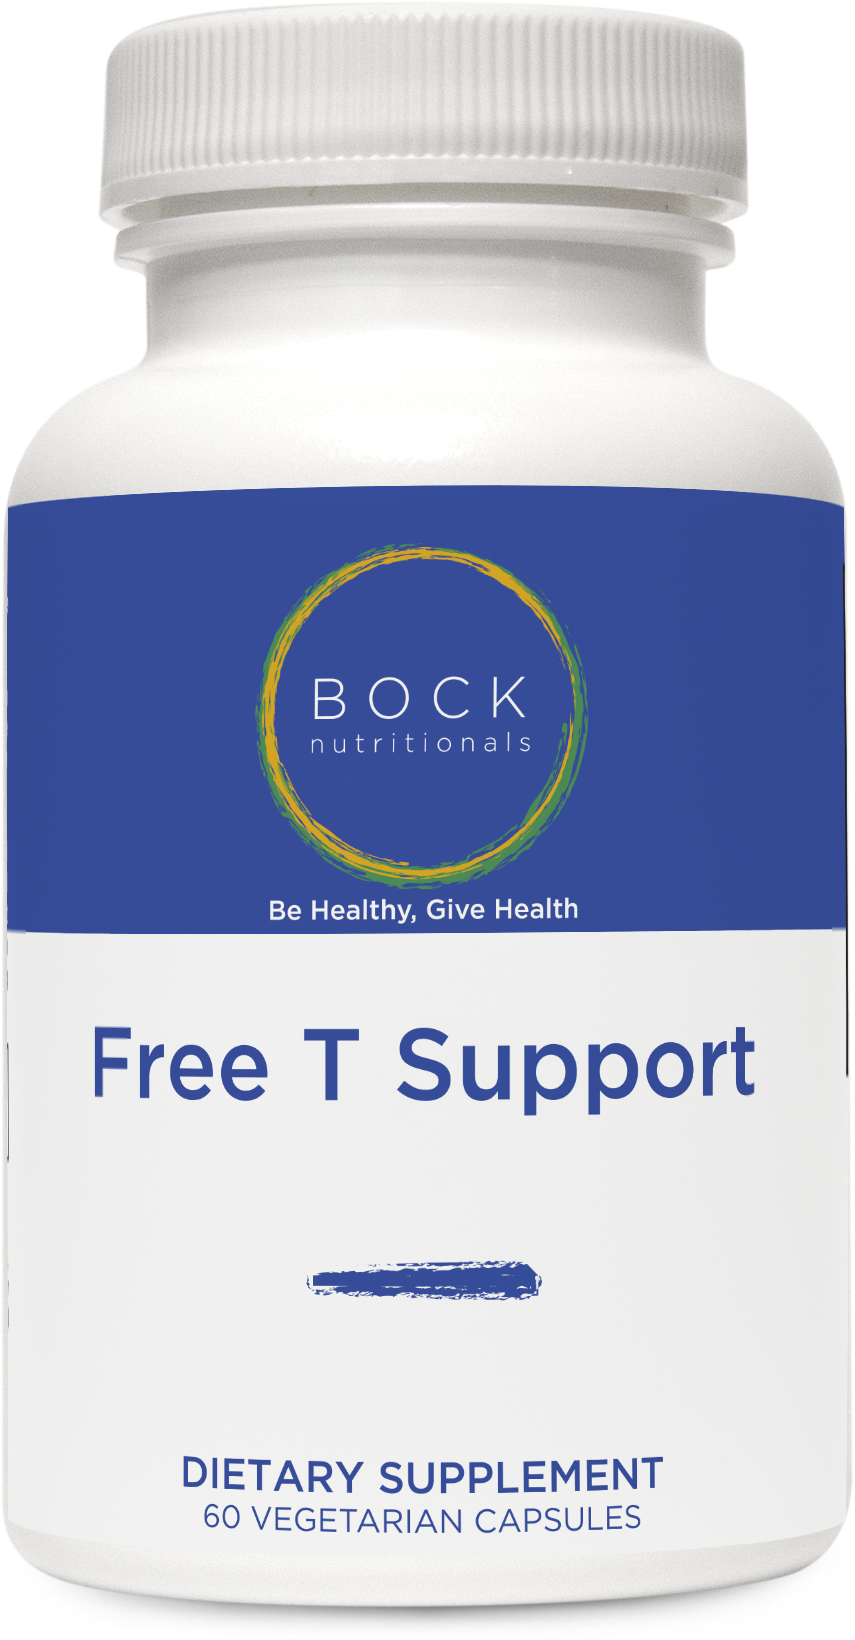 Free T Support